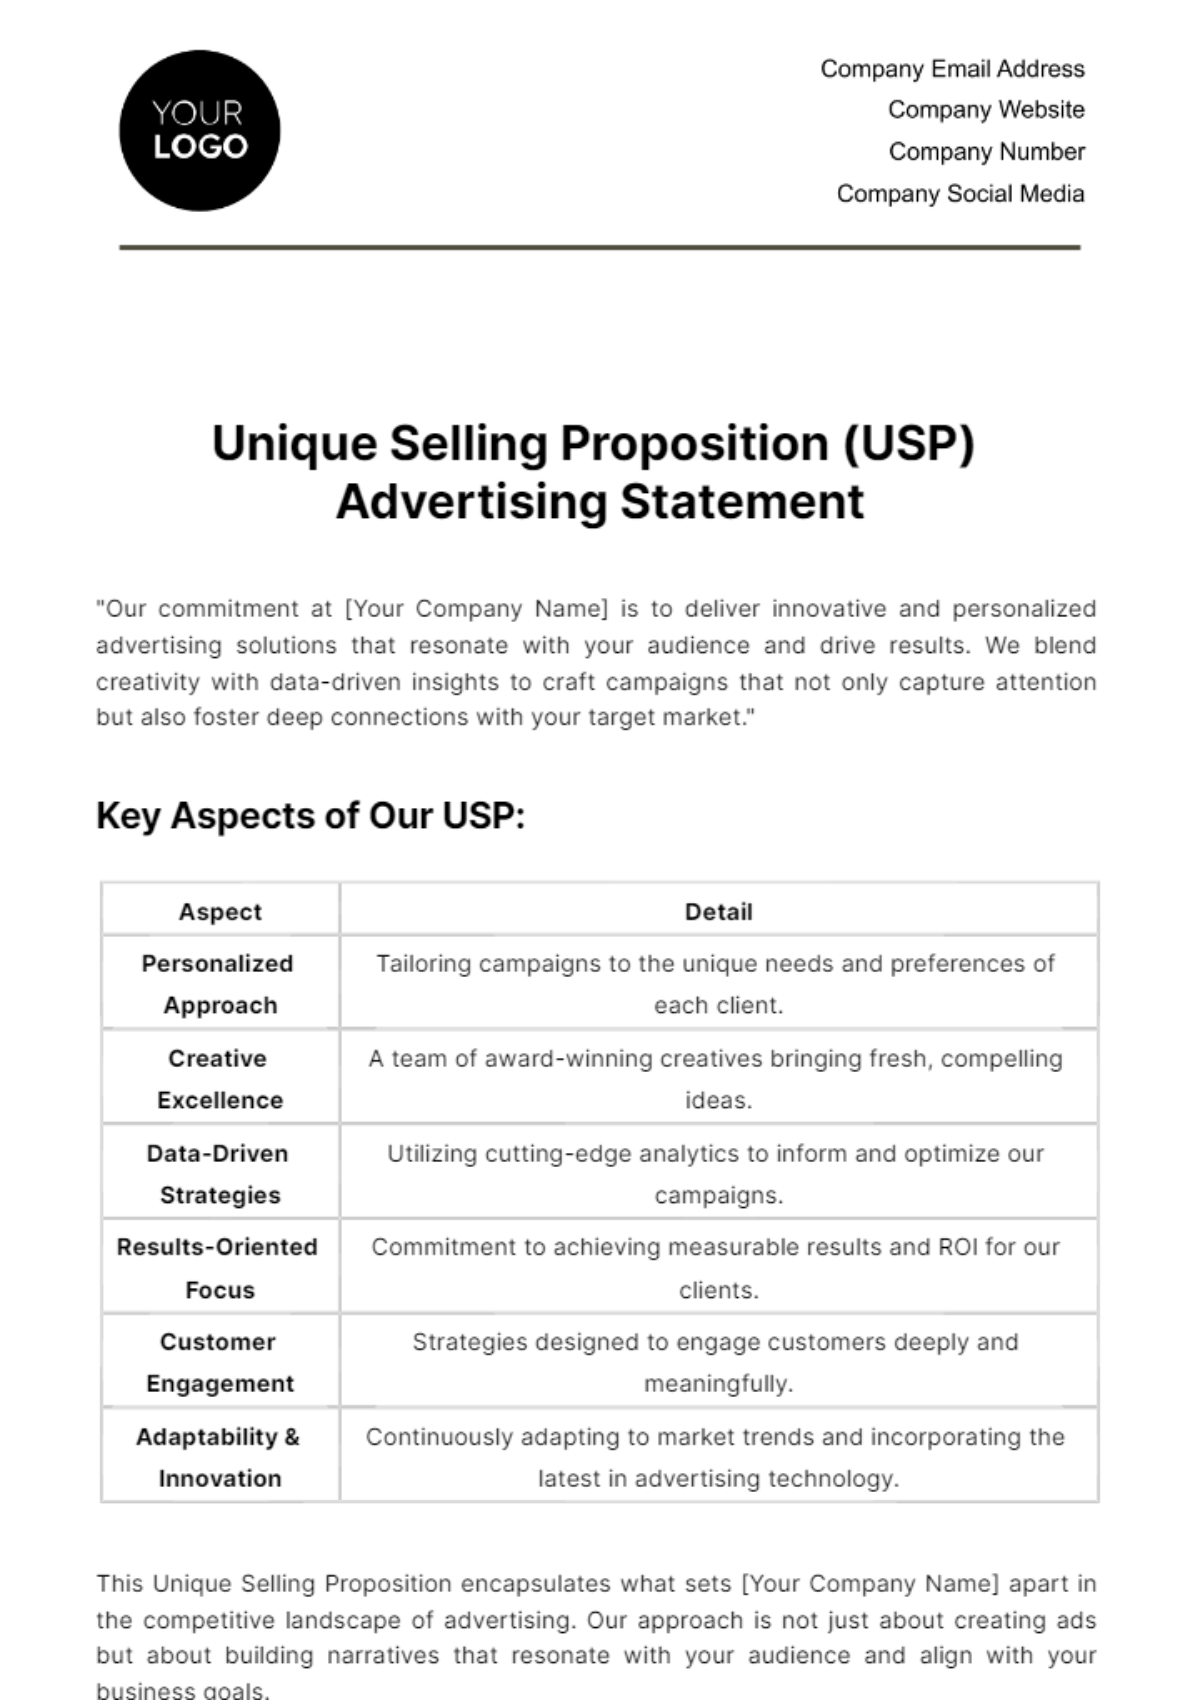 Unique Selling Proposition (USP) Advertising Statement Template